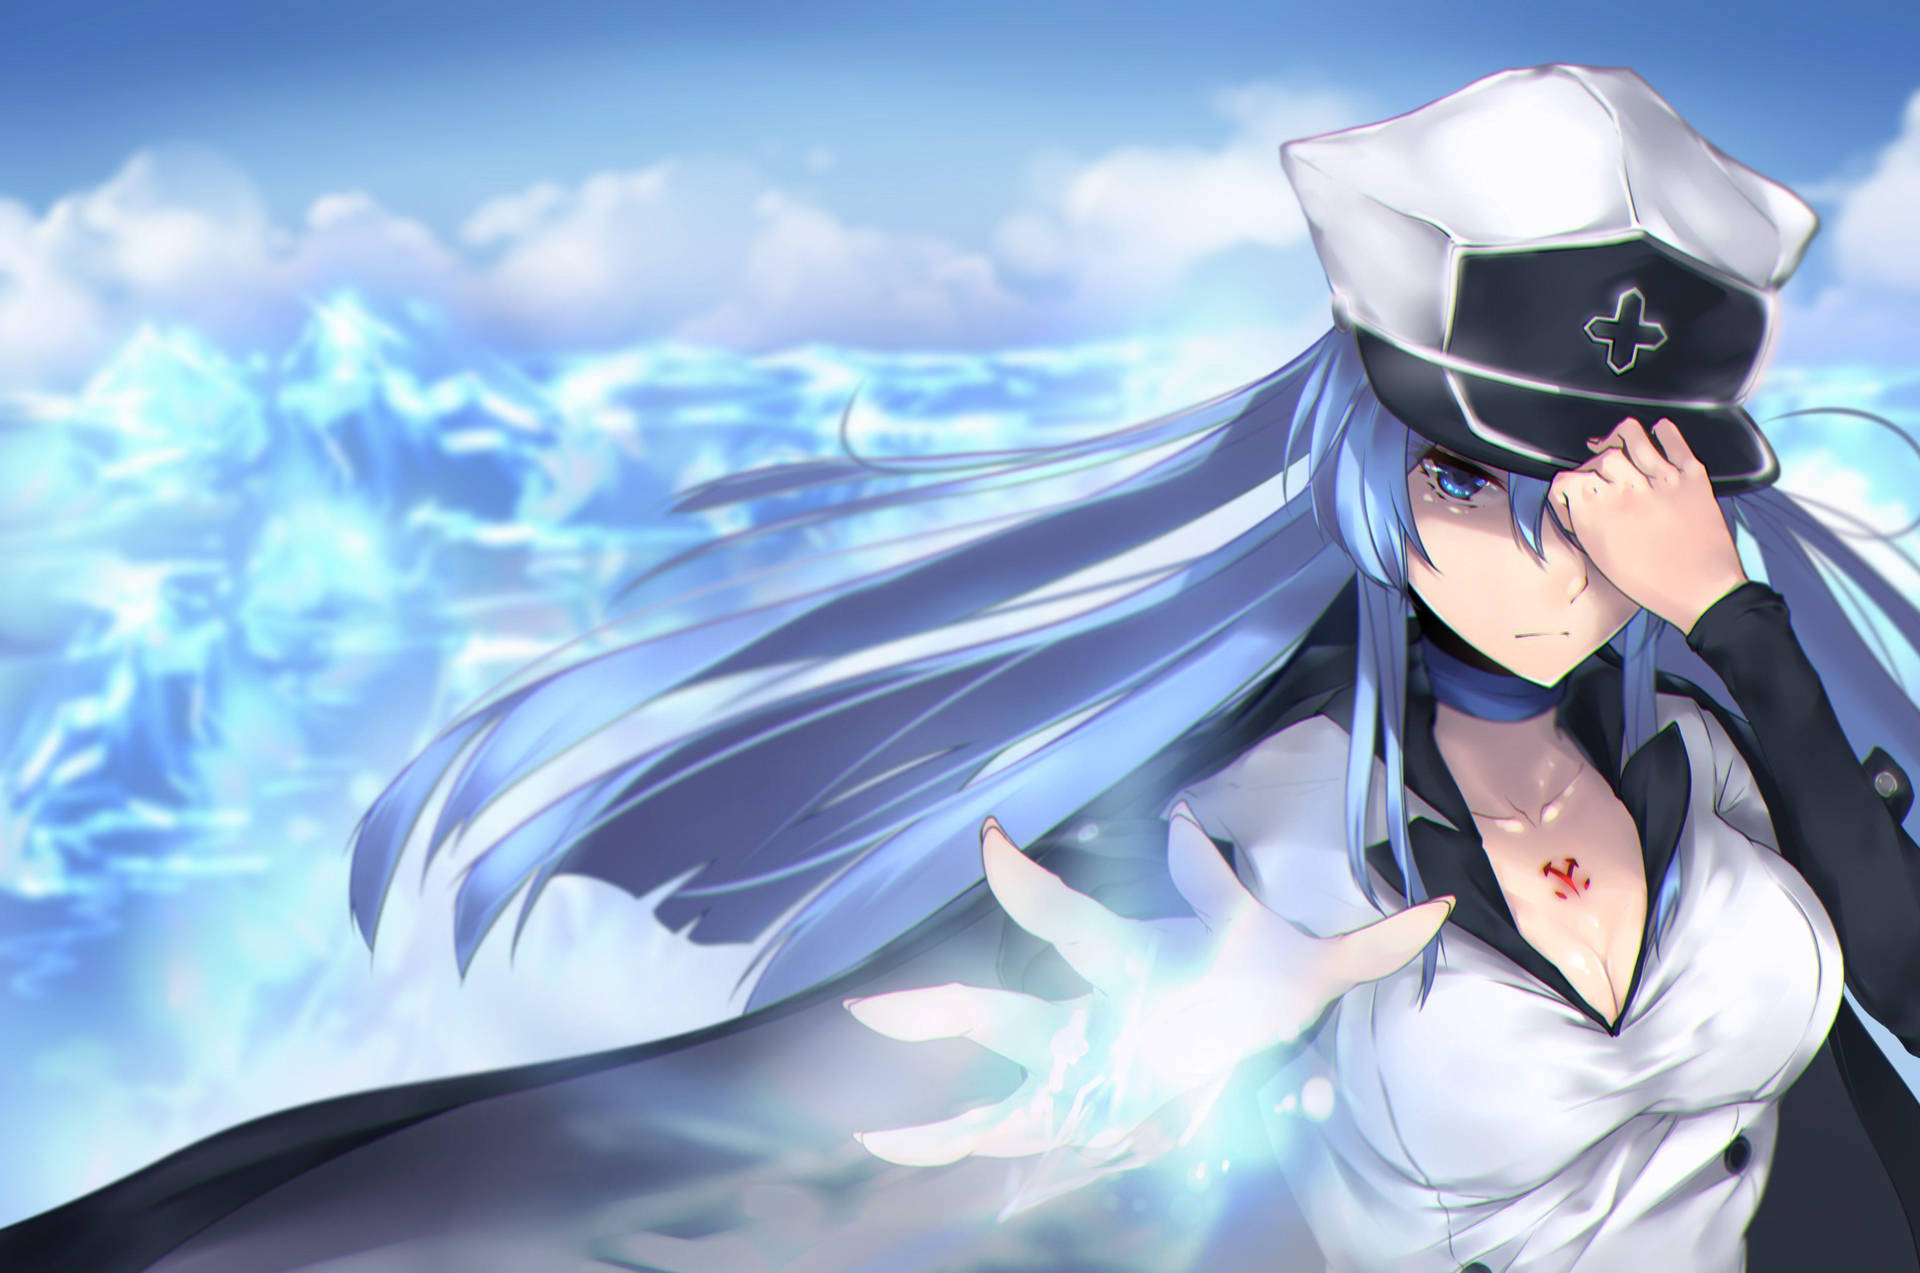 Top 999+ Esdeath Wallpaper Full HD, 4K✅Free to Use